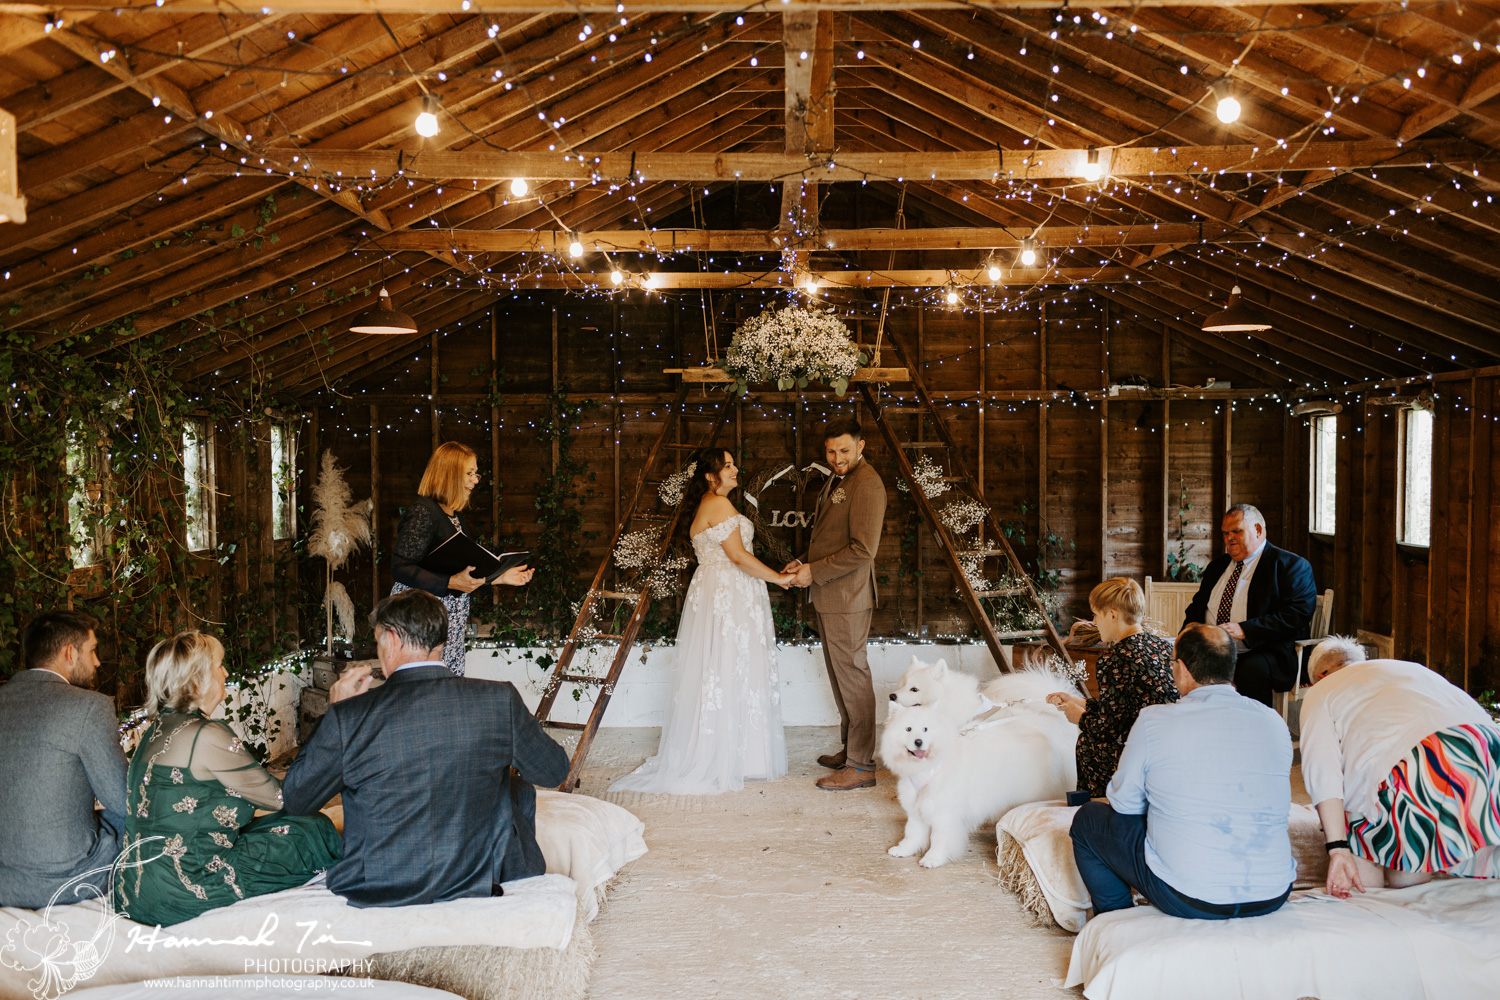 Cow Shed Cornwall wedding photographer